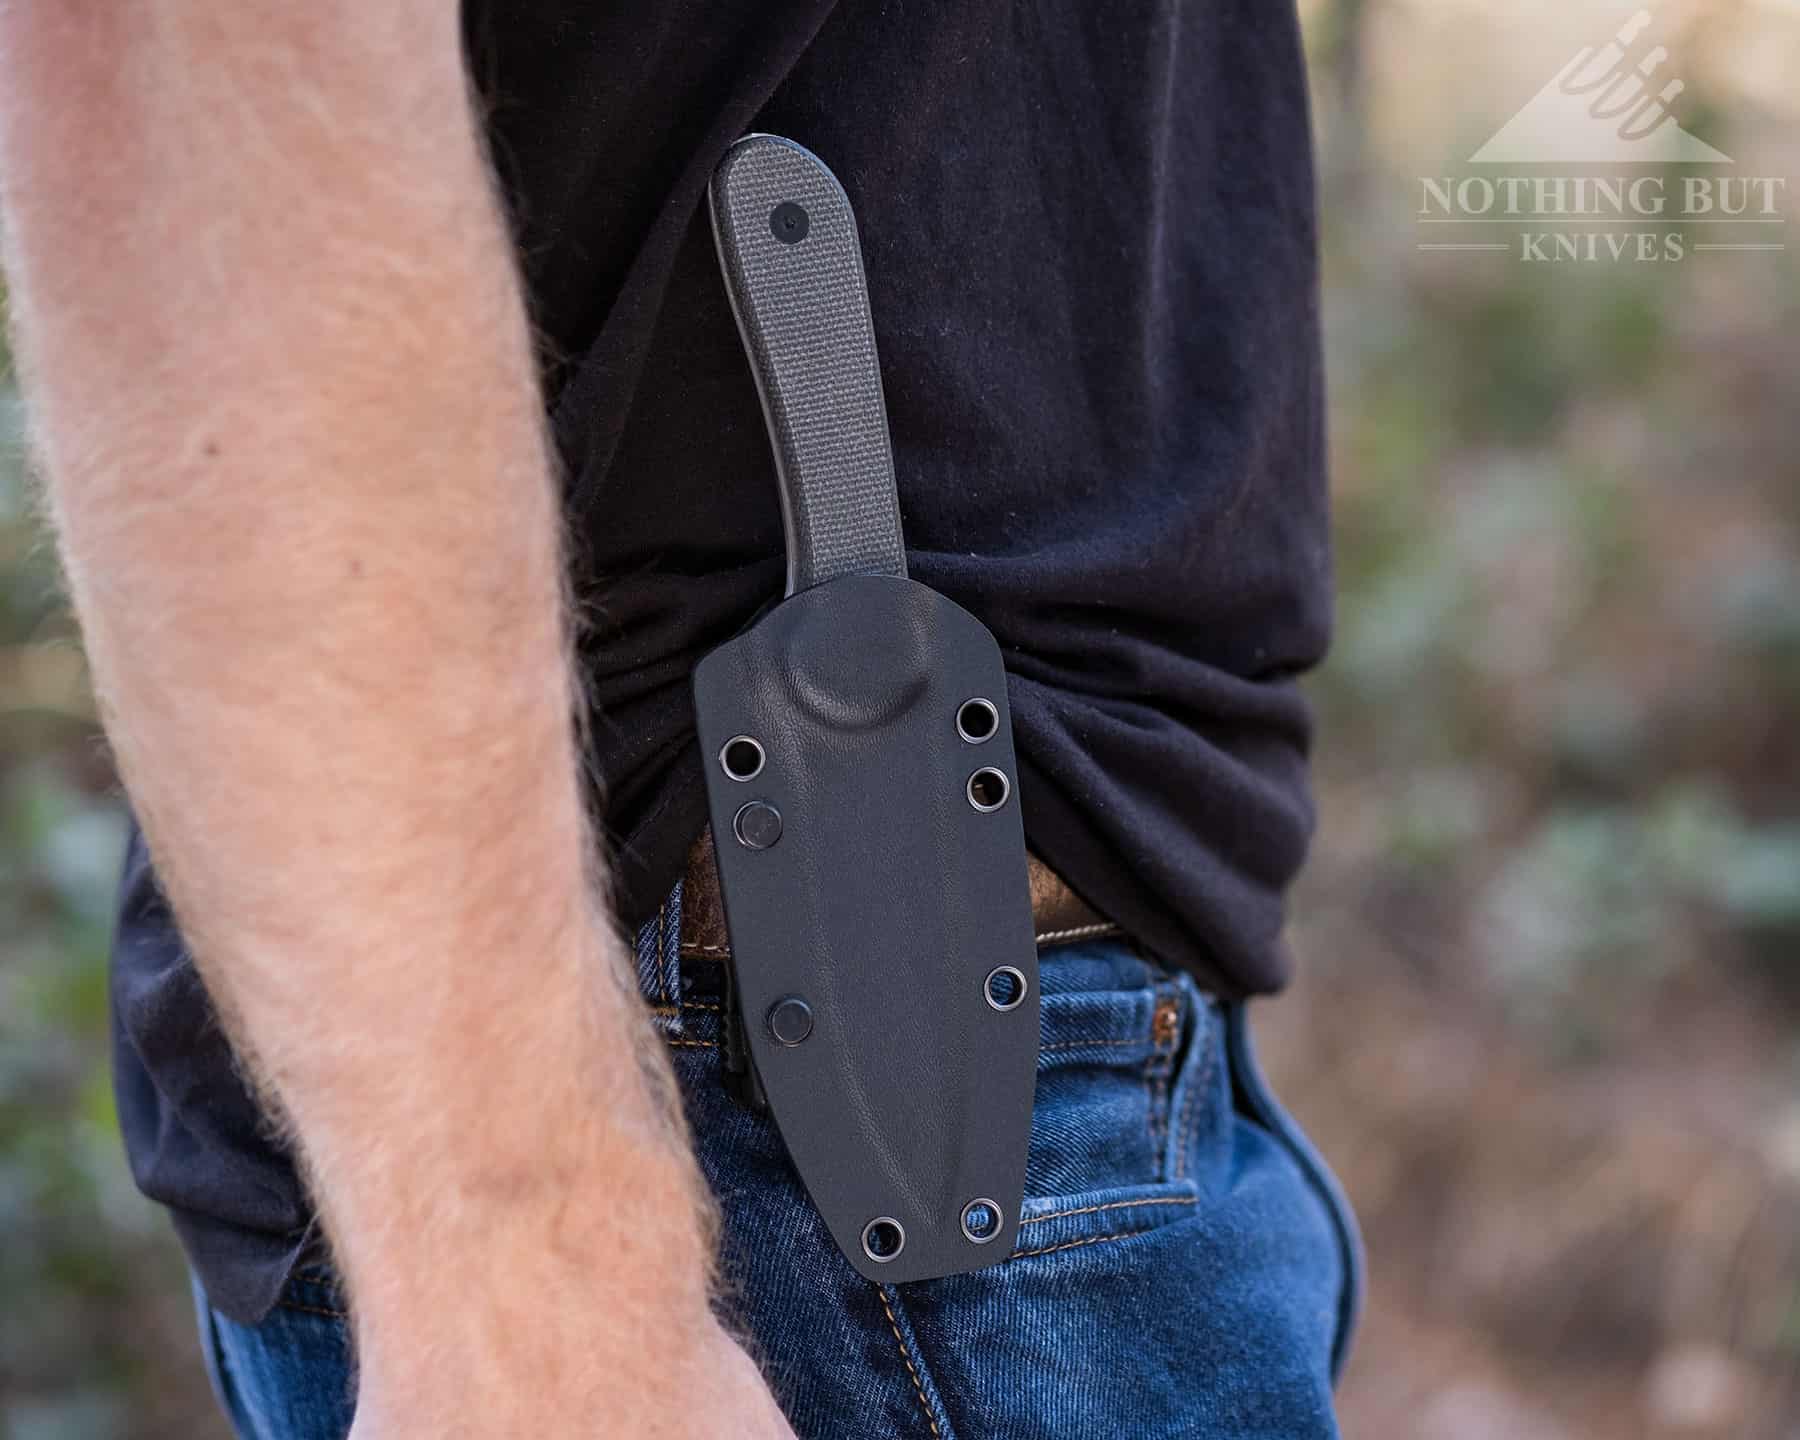 A close-up of the Elementum in its kydex sheath on a persons belt.